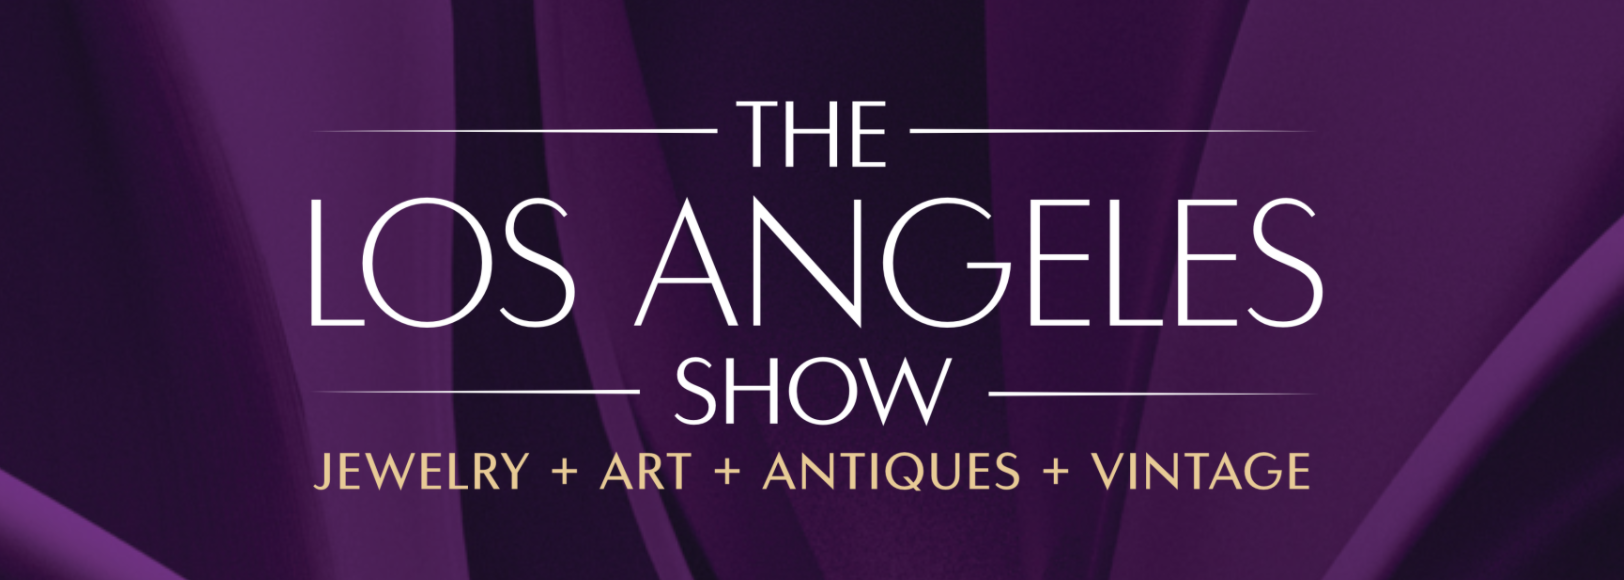 The Los Angeles Show | Jewelry + Art + Antiques + Vintage